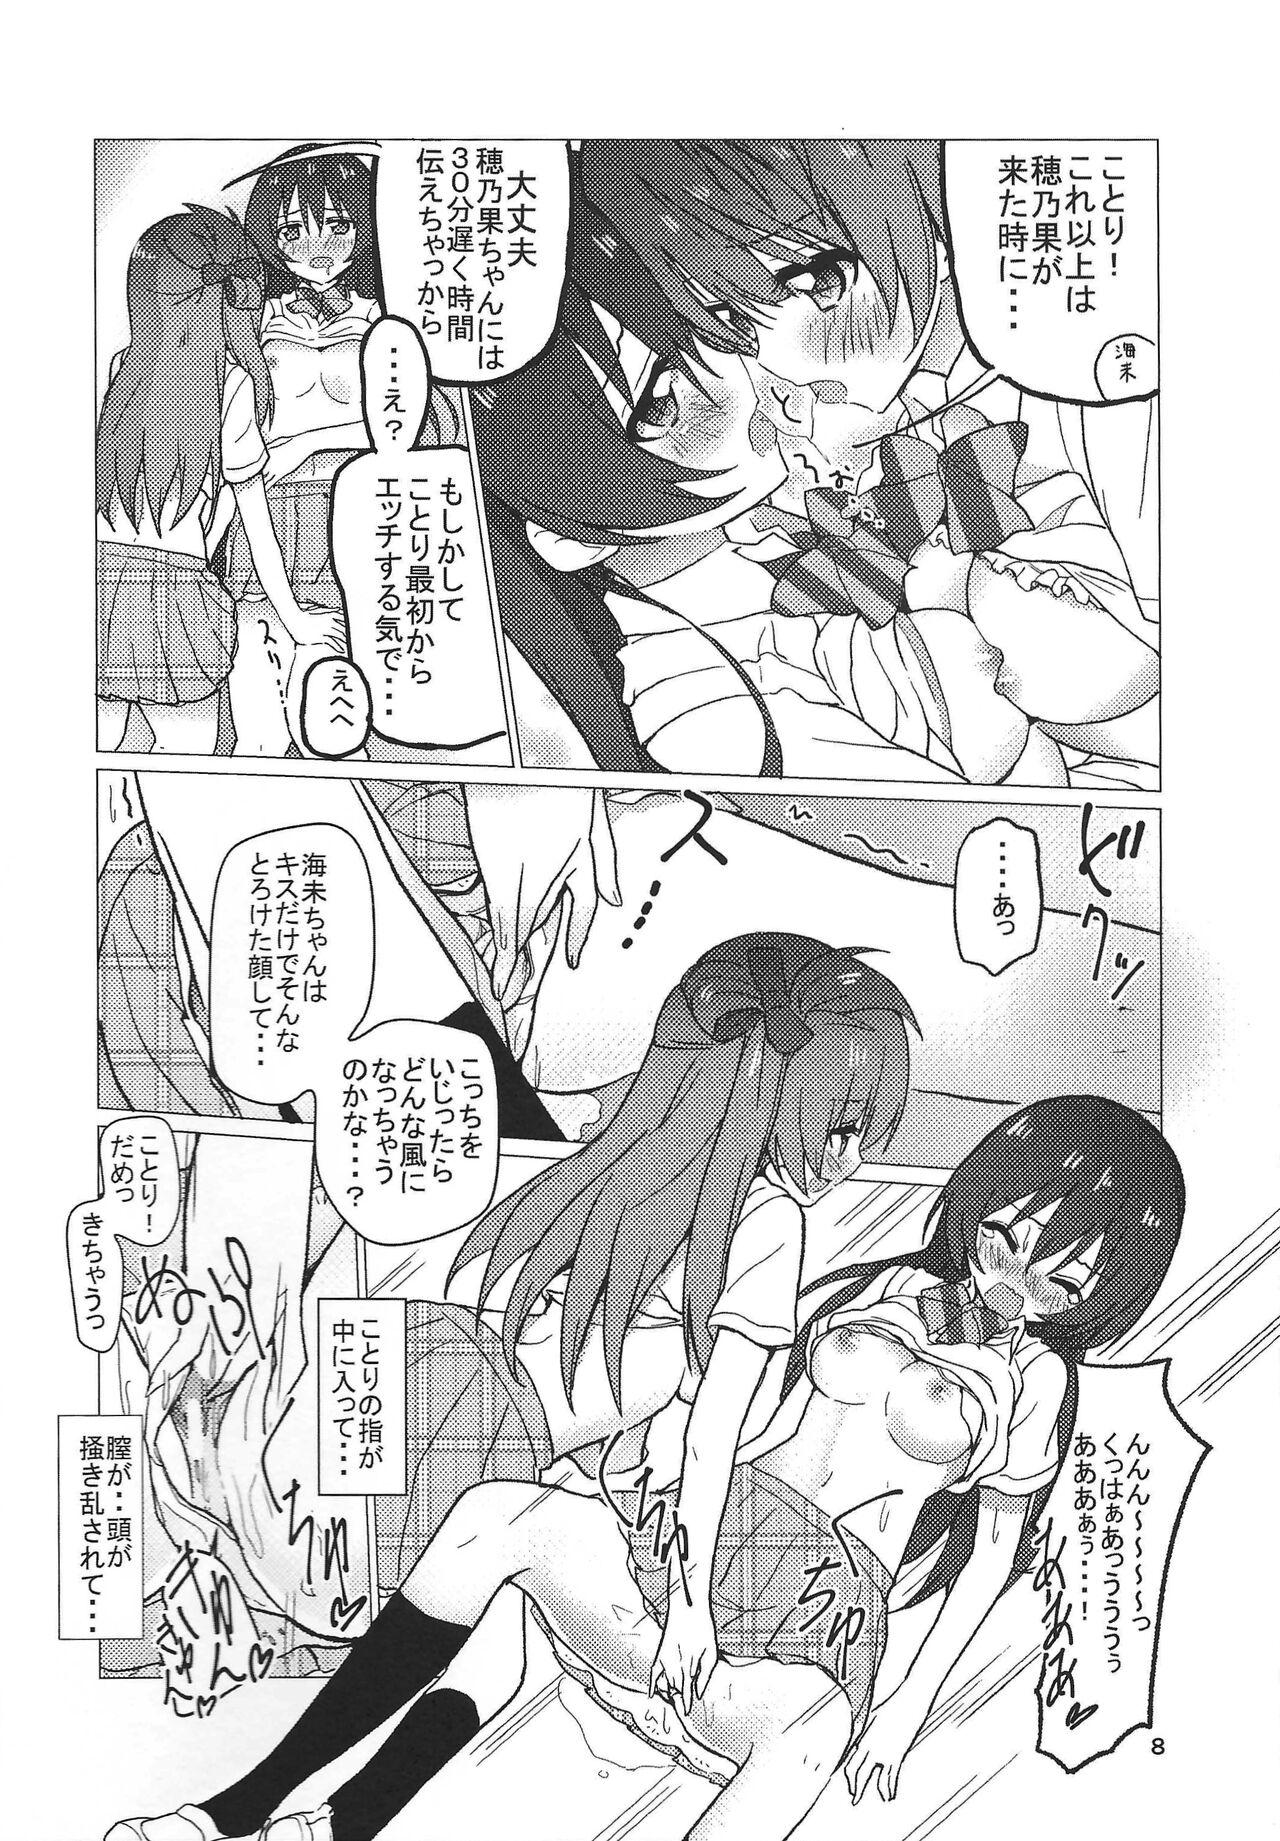 Hot Naked Girl 海未ちゃん笑顔で1,2,Jump! - Love live Movies - Page 7